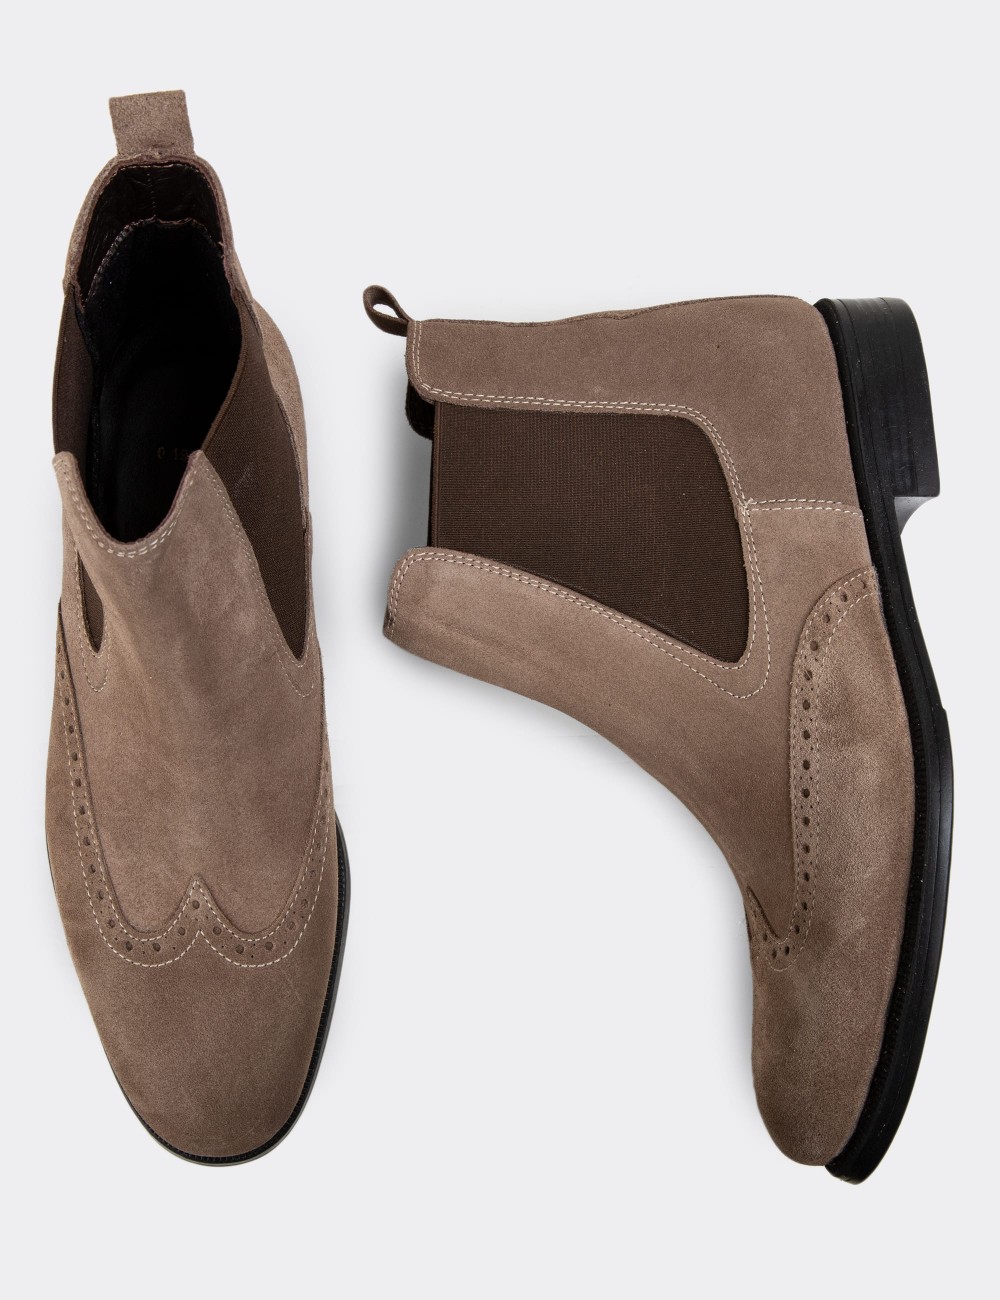 Sandstone Suede Leather Chelsea Boots - 01920MVZNC01